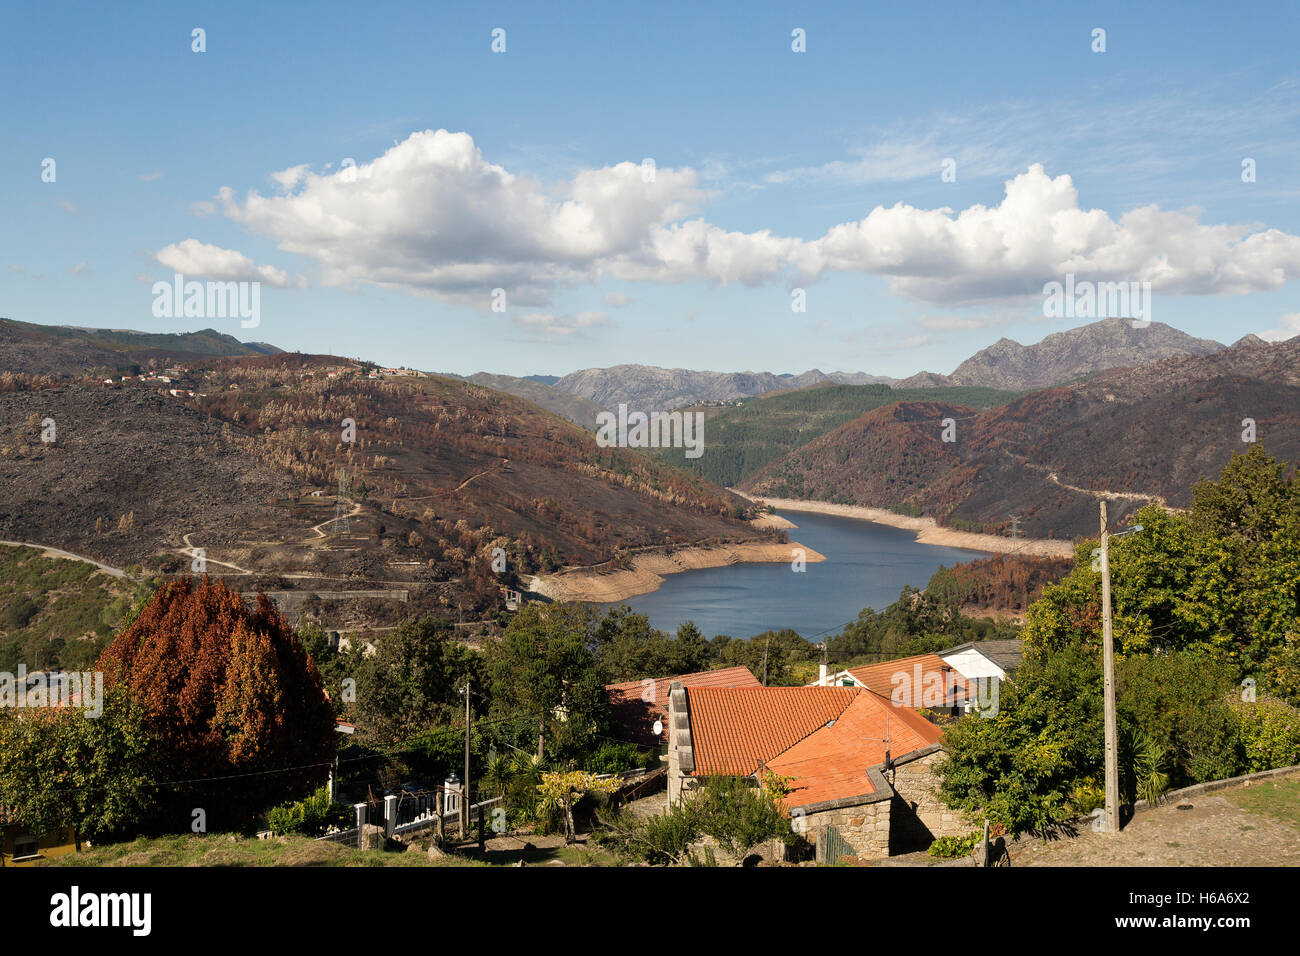 View of the village of Lindoso and the reservoir of the Alto Lindoso Dam on the Lima River, Portugal Stock Photo